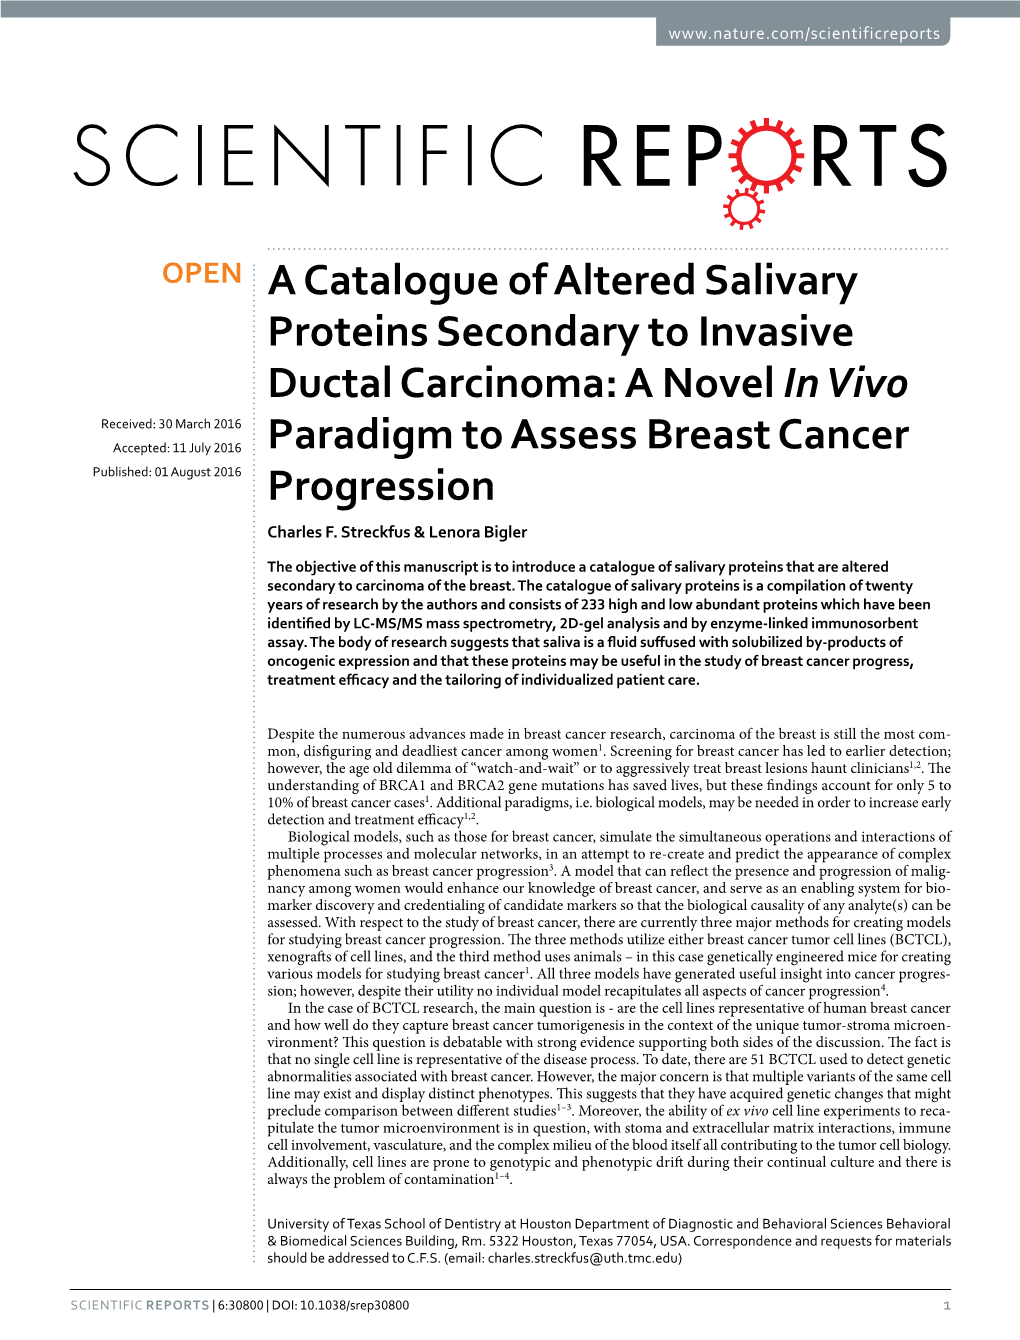 A Catalogue of Altered Salivary Proteins Secondary to Invasive Ductal Carcinoma